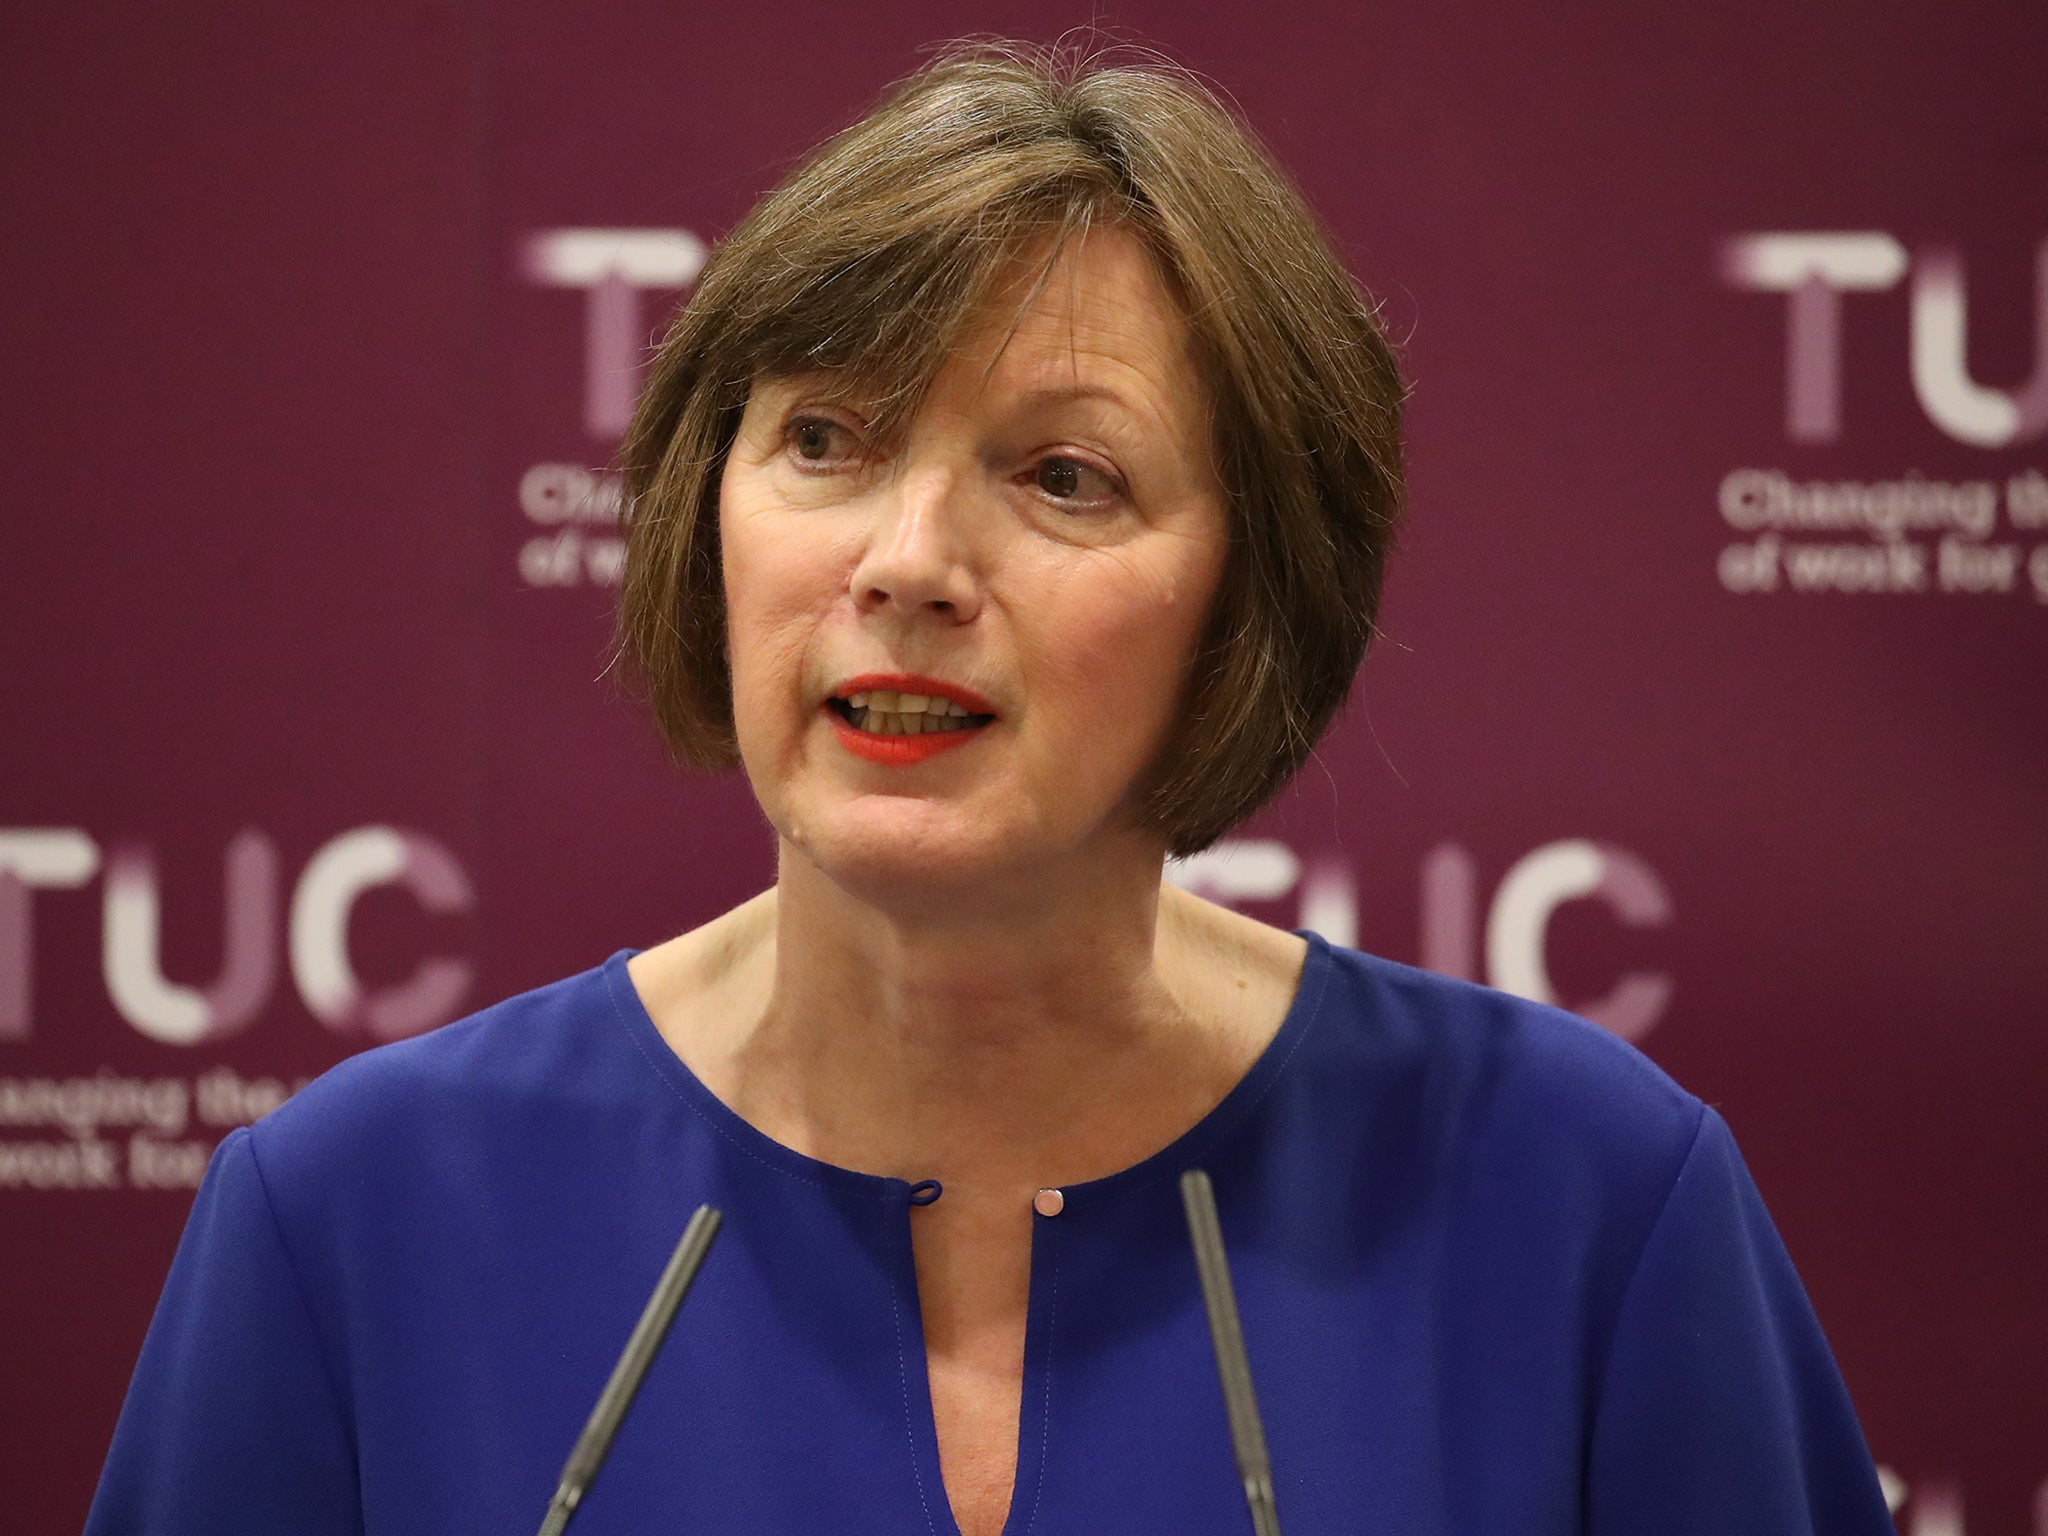 TUC leader Frances O'Grady is launching the first virtual congress